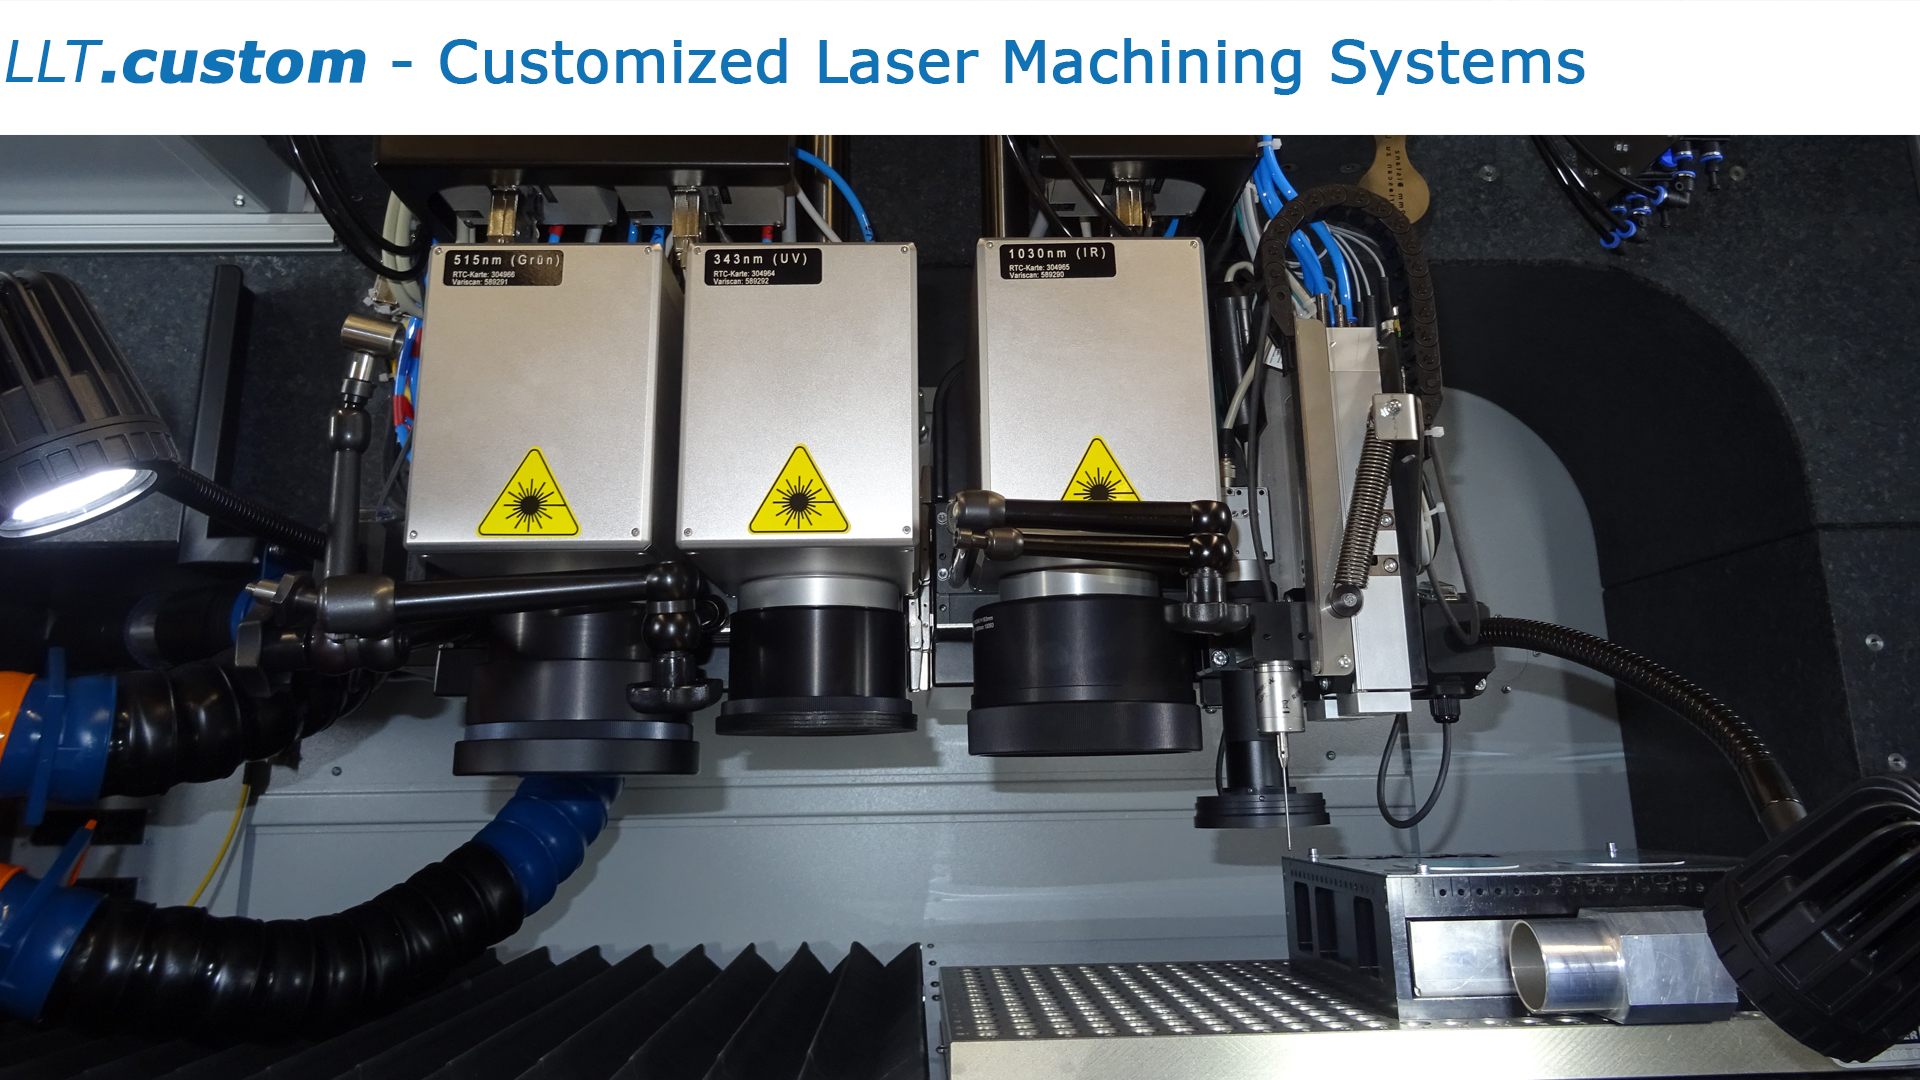 𝘓𝘓𝘛.𝙘𝙪𝙨𝙩𝙤𝙢 - Customized Laser Machining Systems